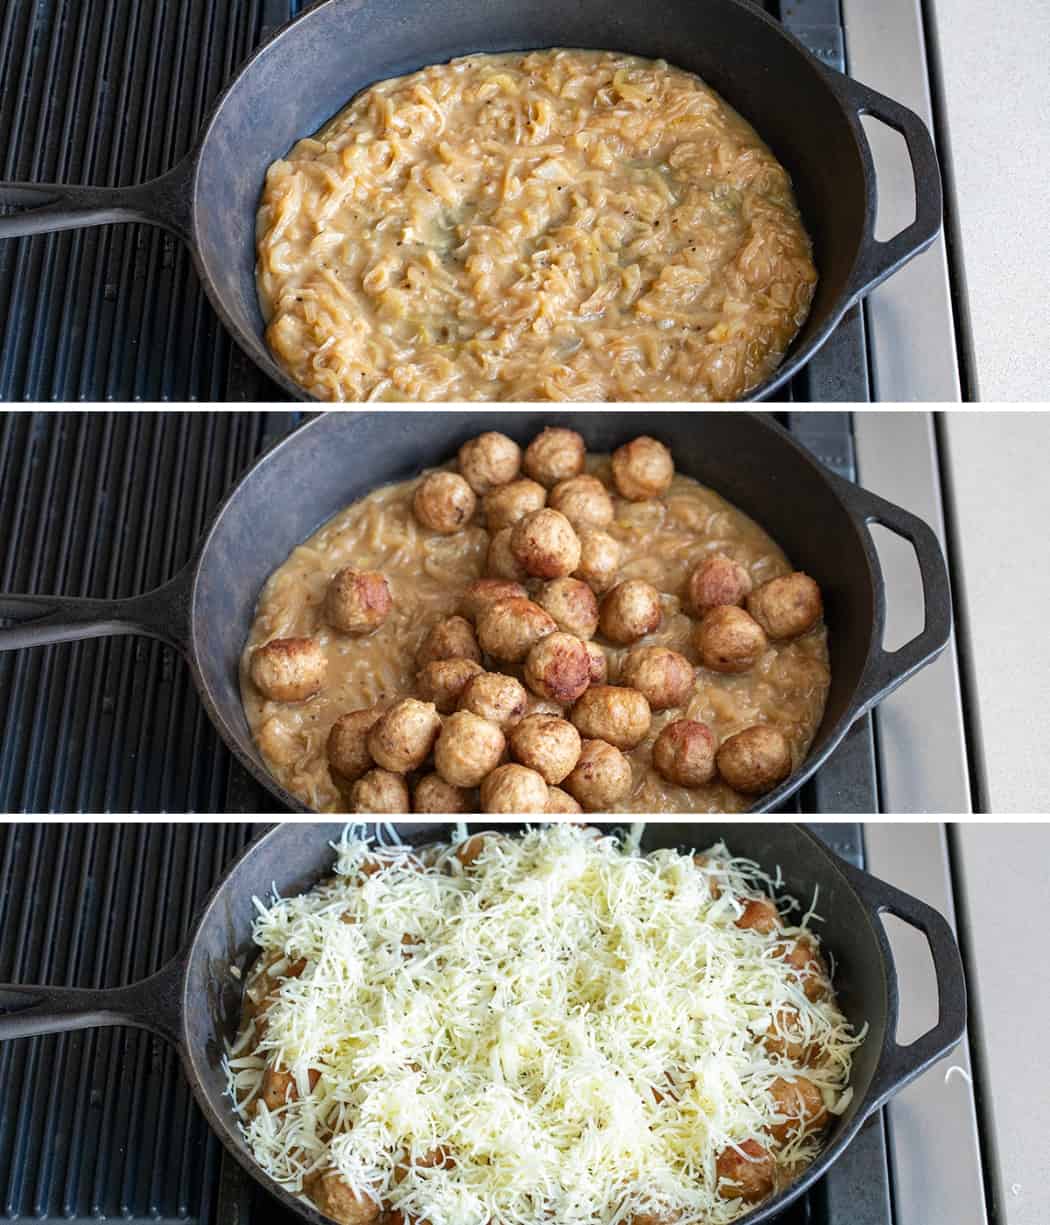 Steps for Making French Onion Meatballs in a Skillet.